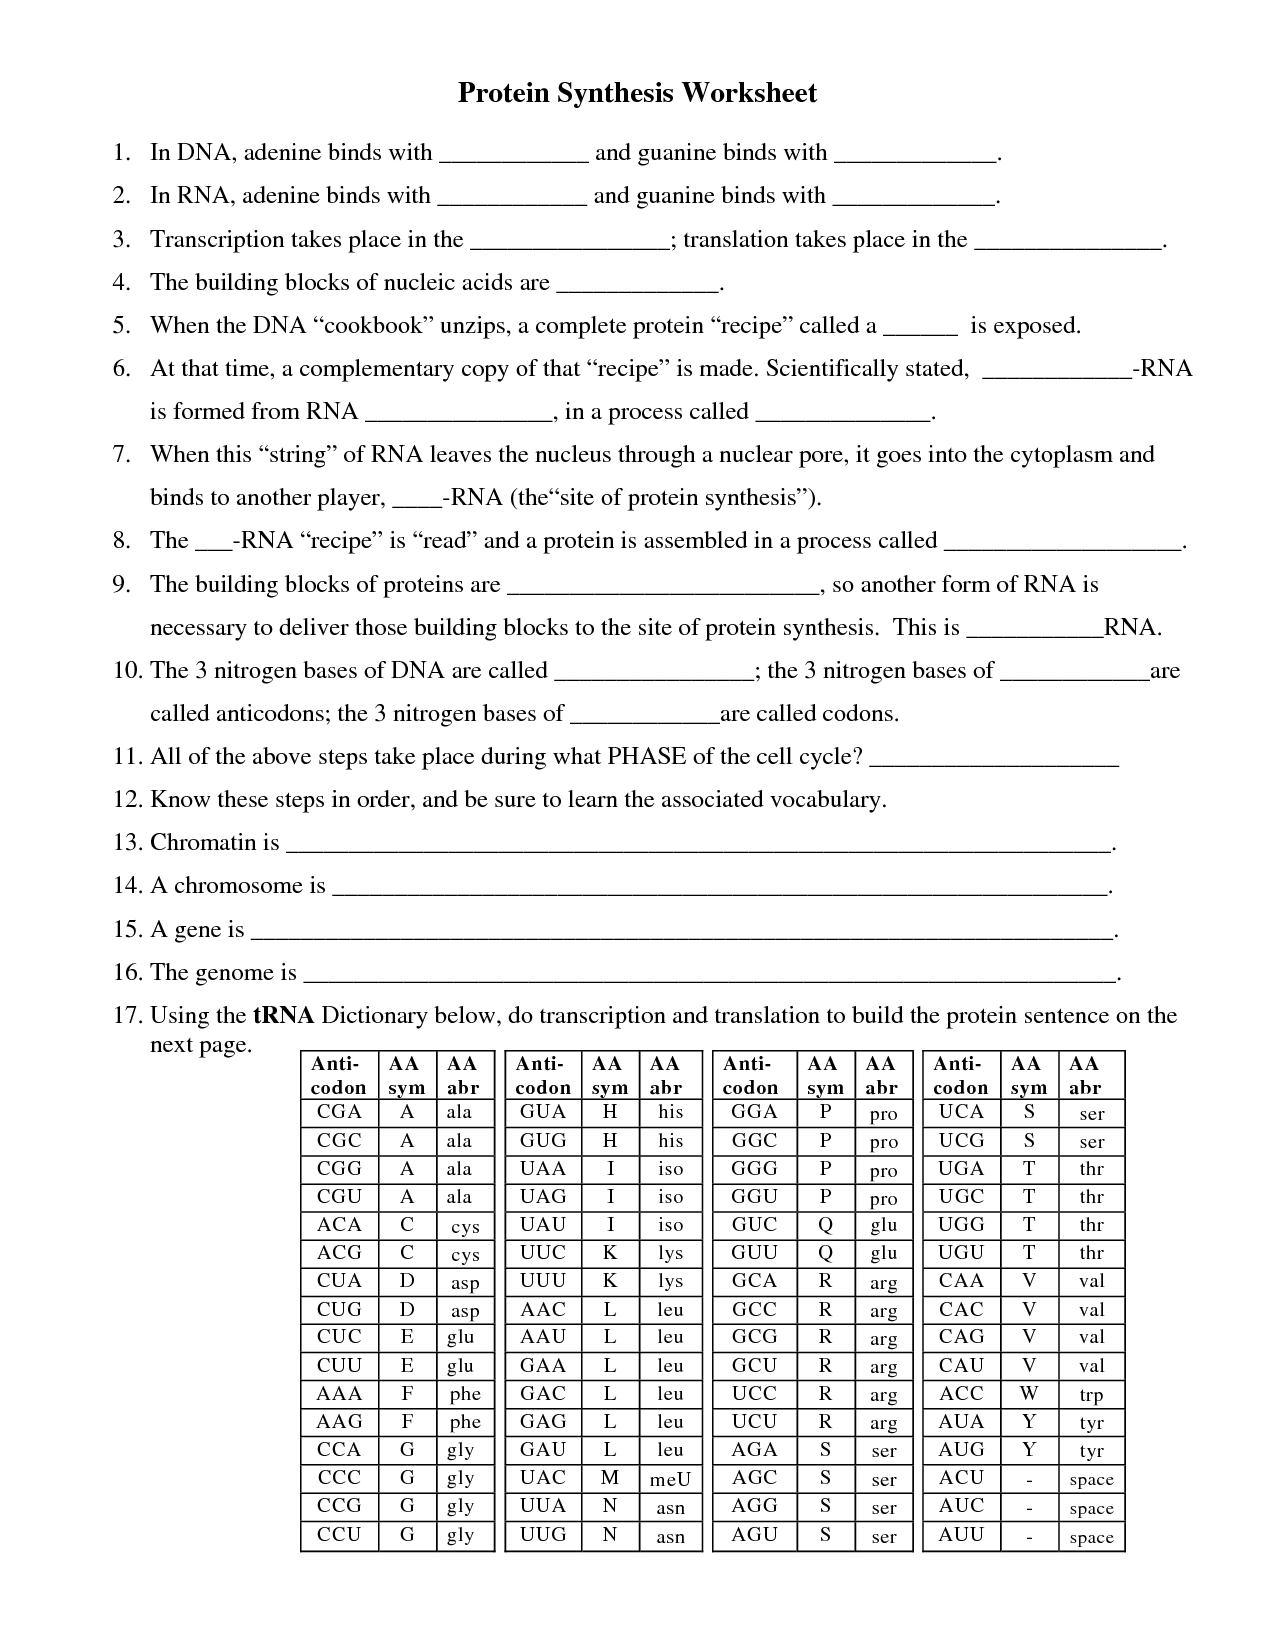 15-best-images-of-nucleic-acids-worksheet-nucleic-acids-worksheet-answers-organic-molecules